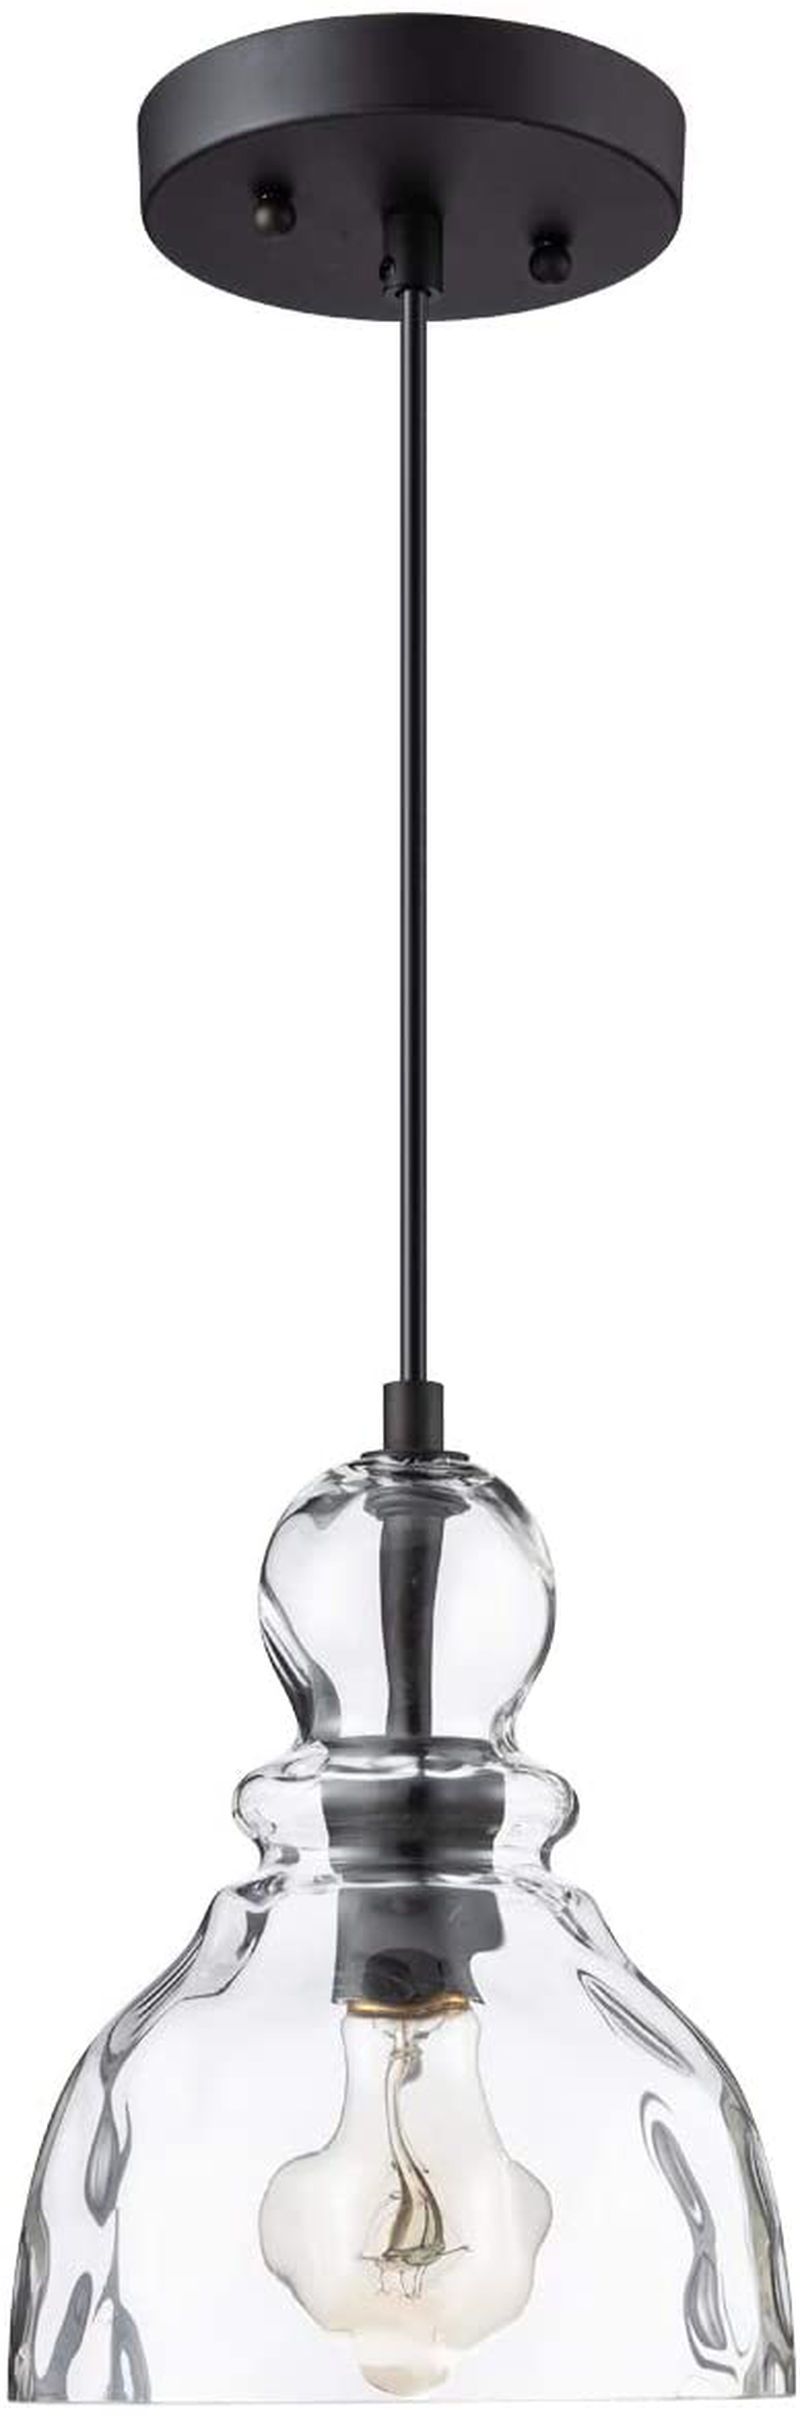 LANROS Farmhouse Mini Pendant Lighting with Handblown Clear Hammered Glass Shade, Adjustable Cord Ceiling Light Fixture for Kitchen Island Hallway Kitchen Sink, Black, 7inch Home & Garden > Lighting > Lighting Fixtures LANROS Hammered, Matte Black  